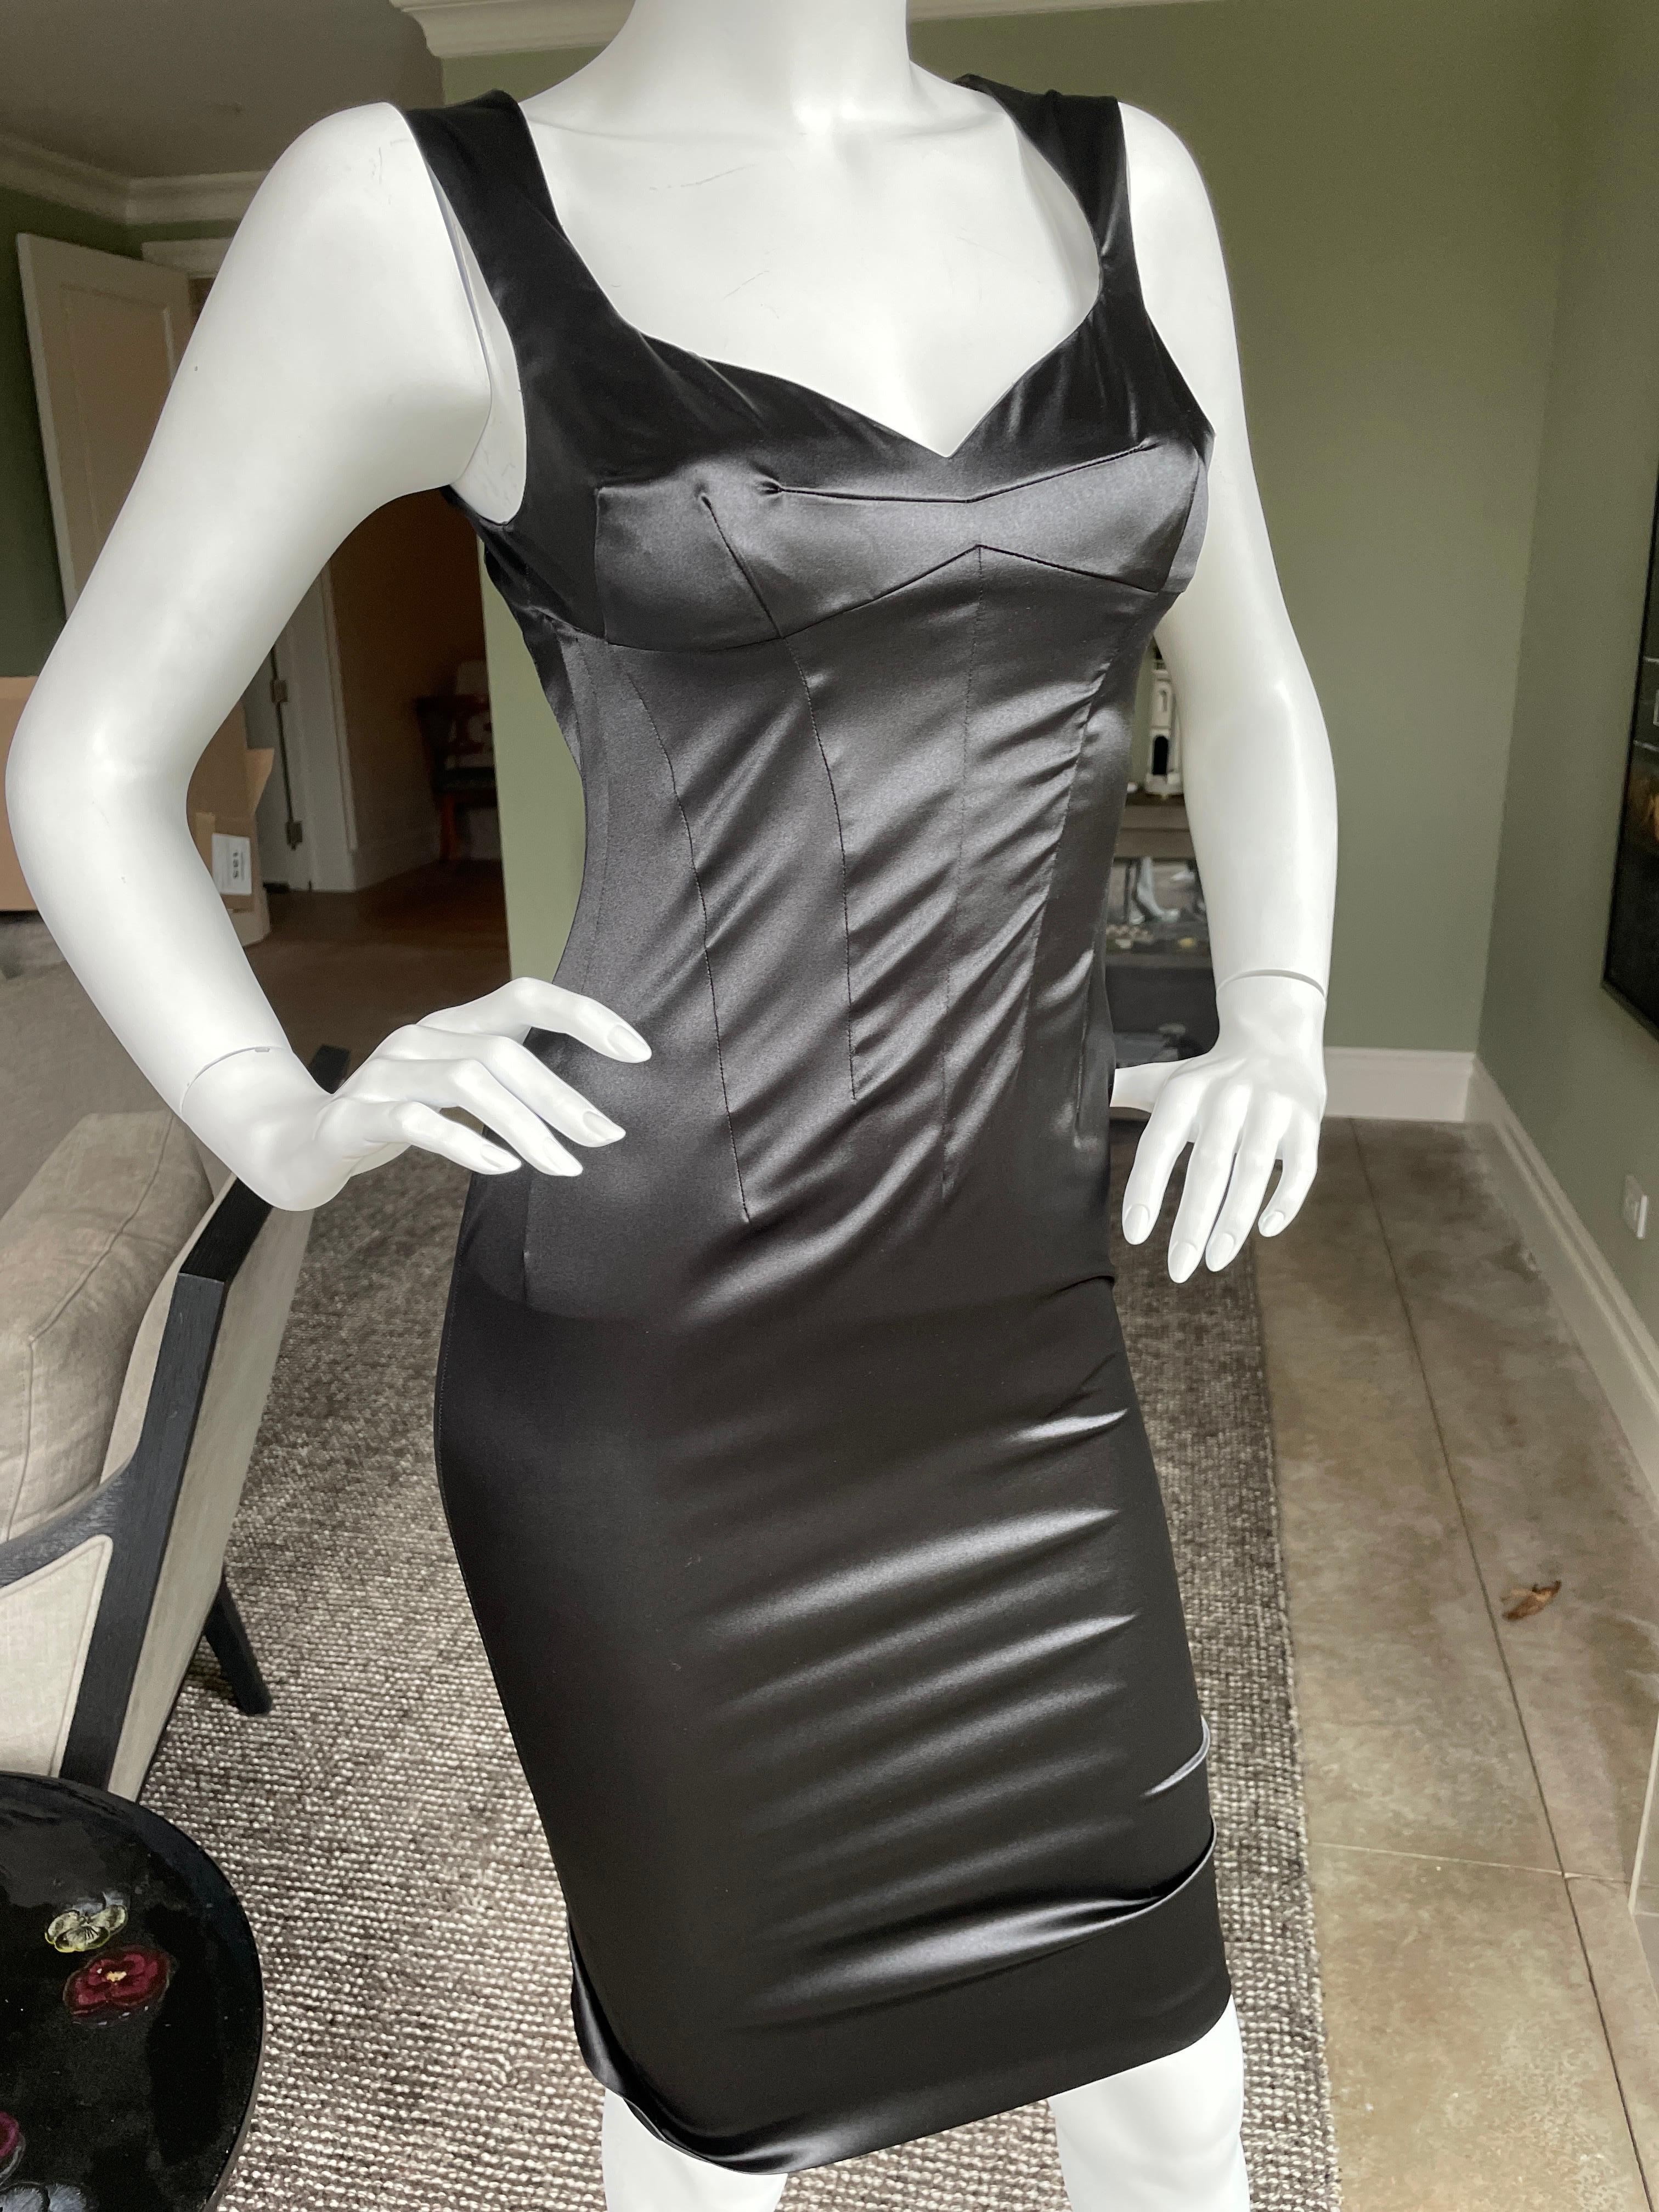 D&G Vintage Black Cocktail Dress by Dolce & Gabbana.
Size 38 but runs very small
 Bust 30